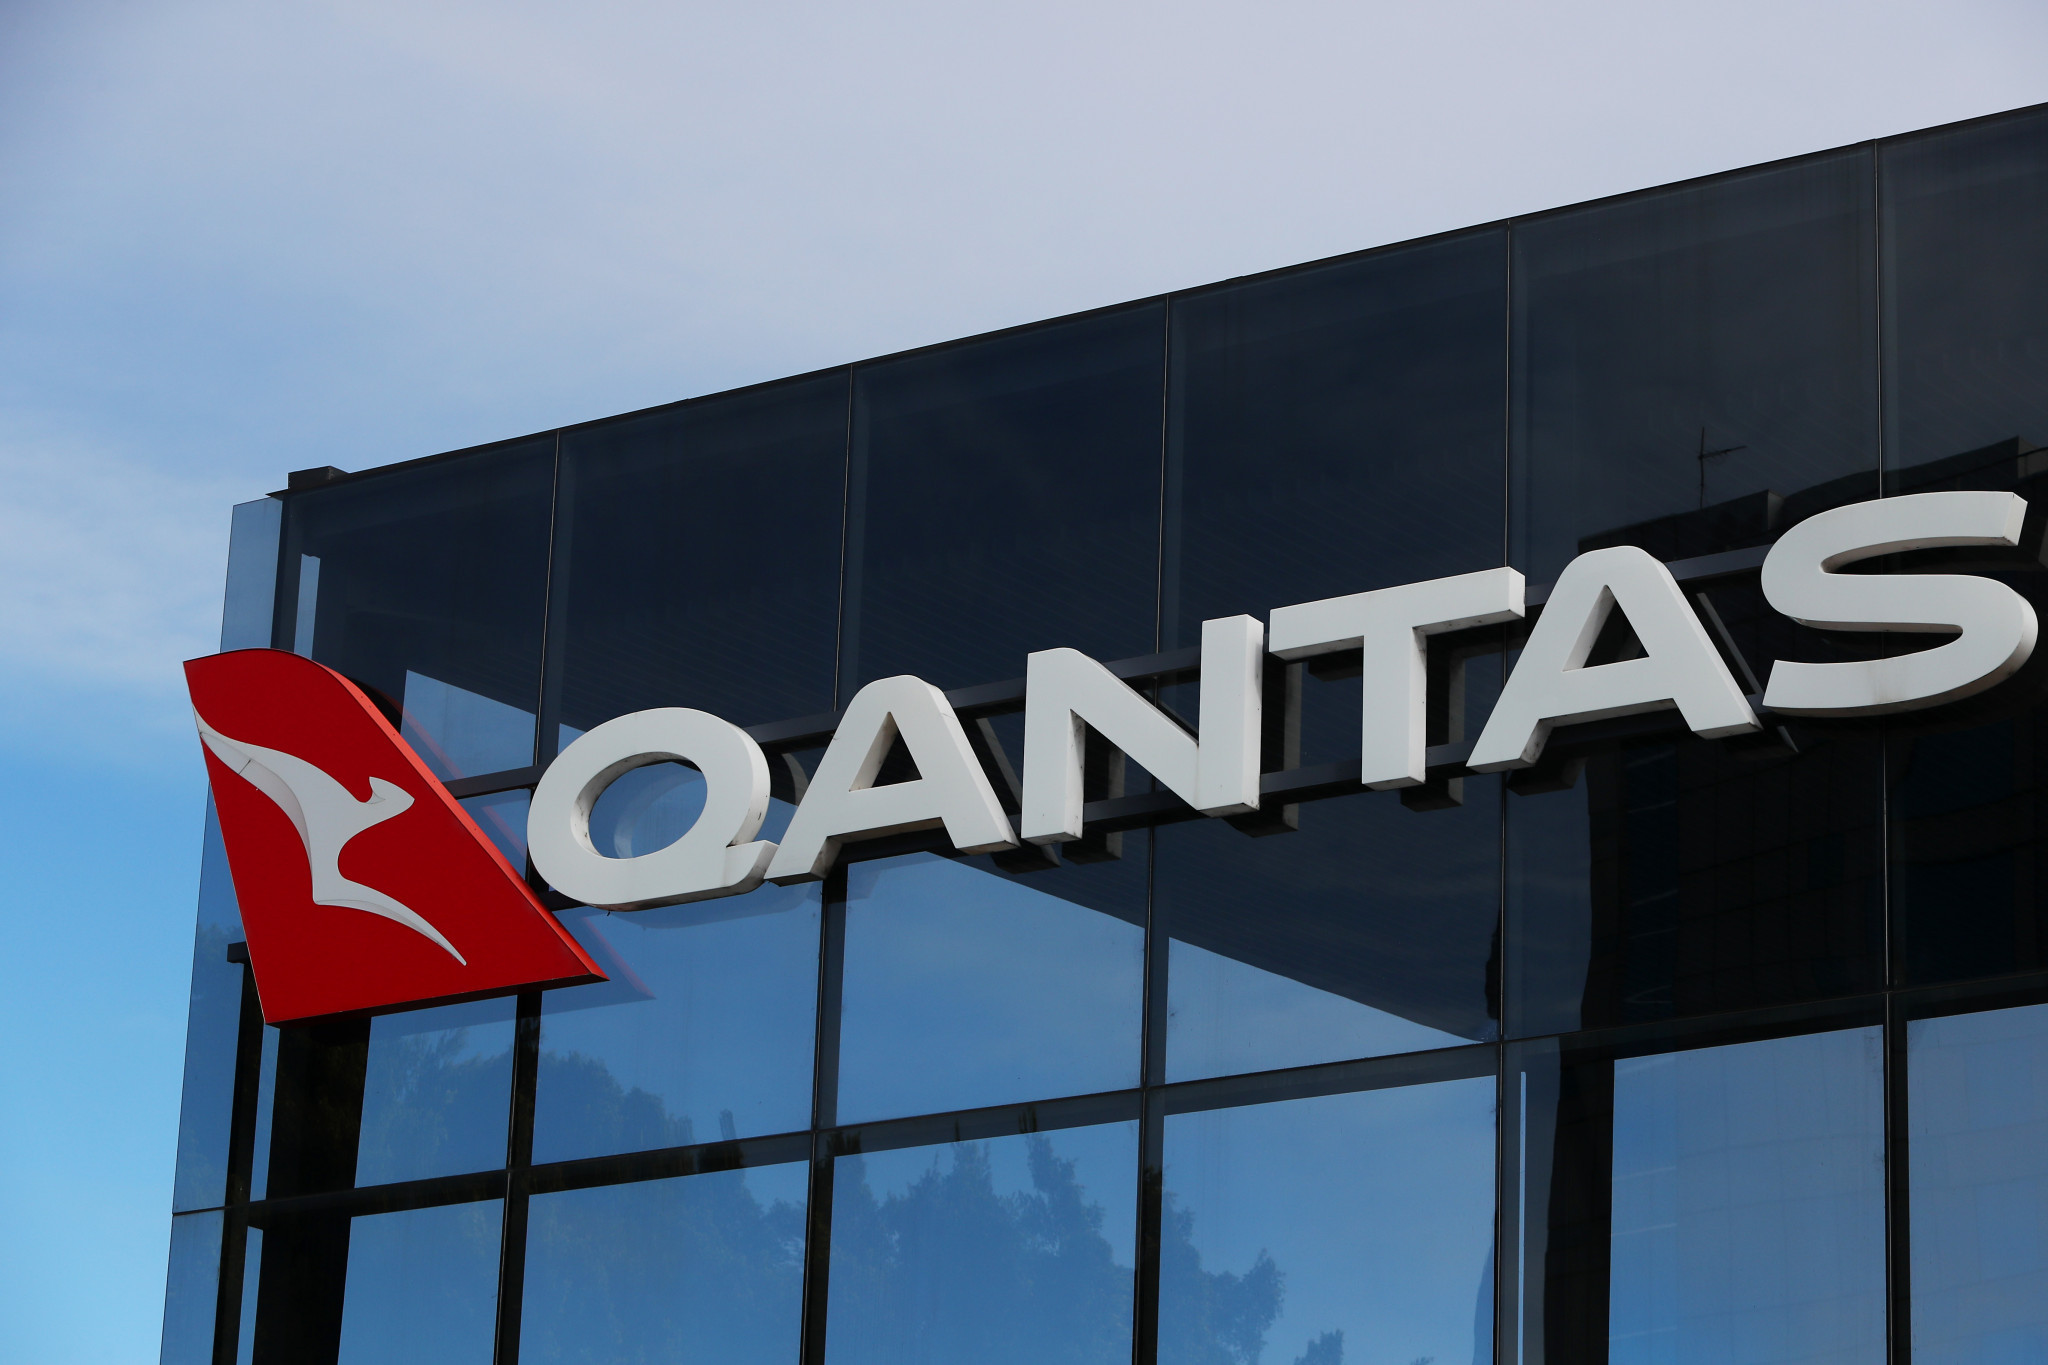 Qantas set to operate direct flights to Paris in time for 2024 Olympic Games